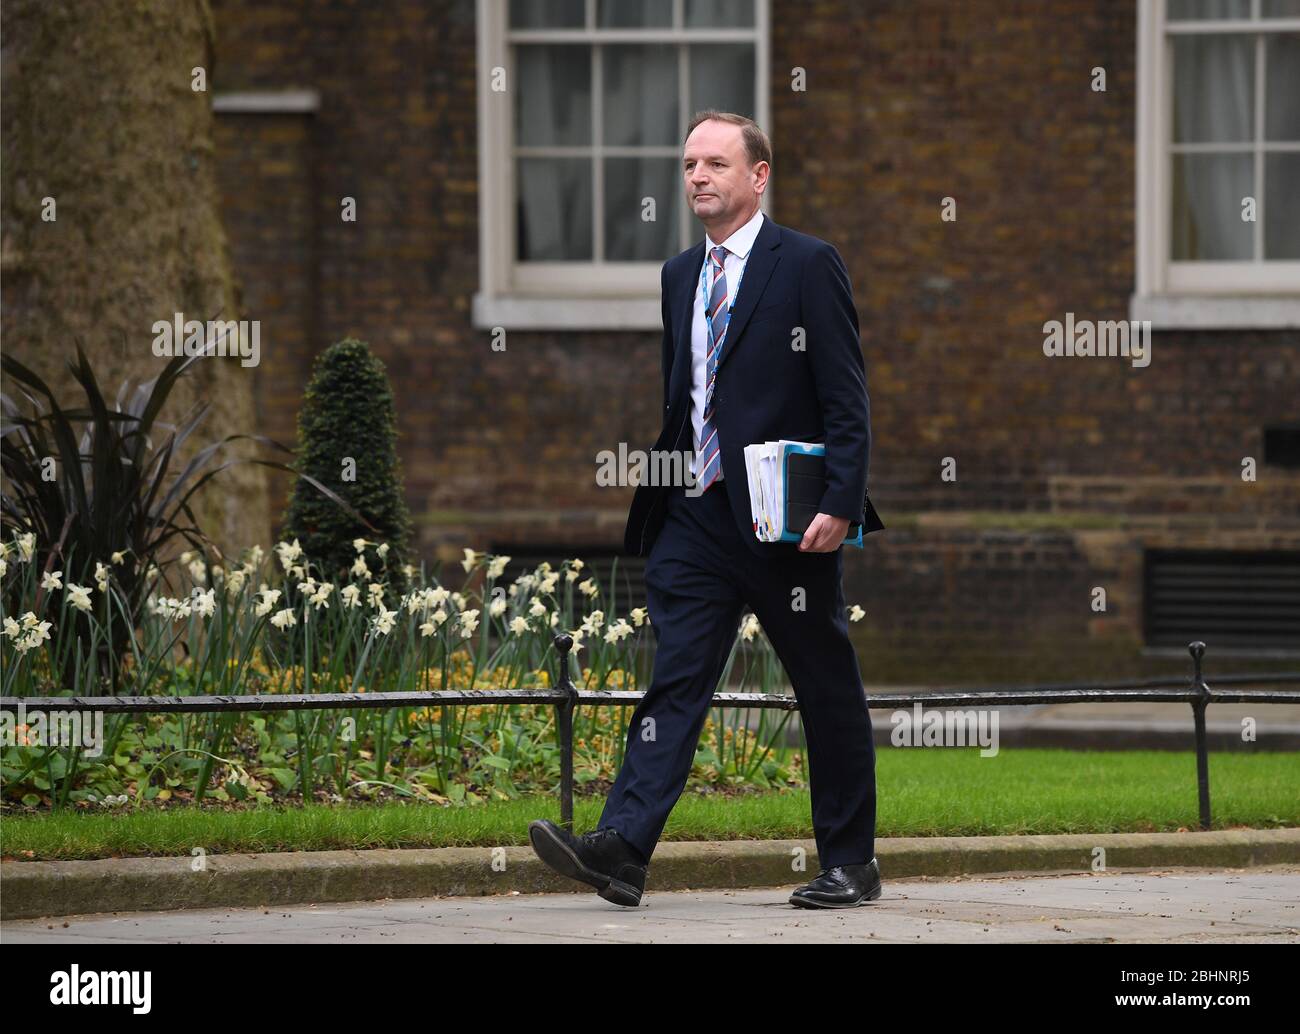 Sir Simon Stevens, Chief Executive of the National Health Service in England arrives in Downing Street, London. Stock Photo